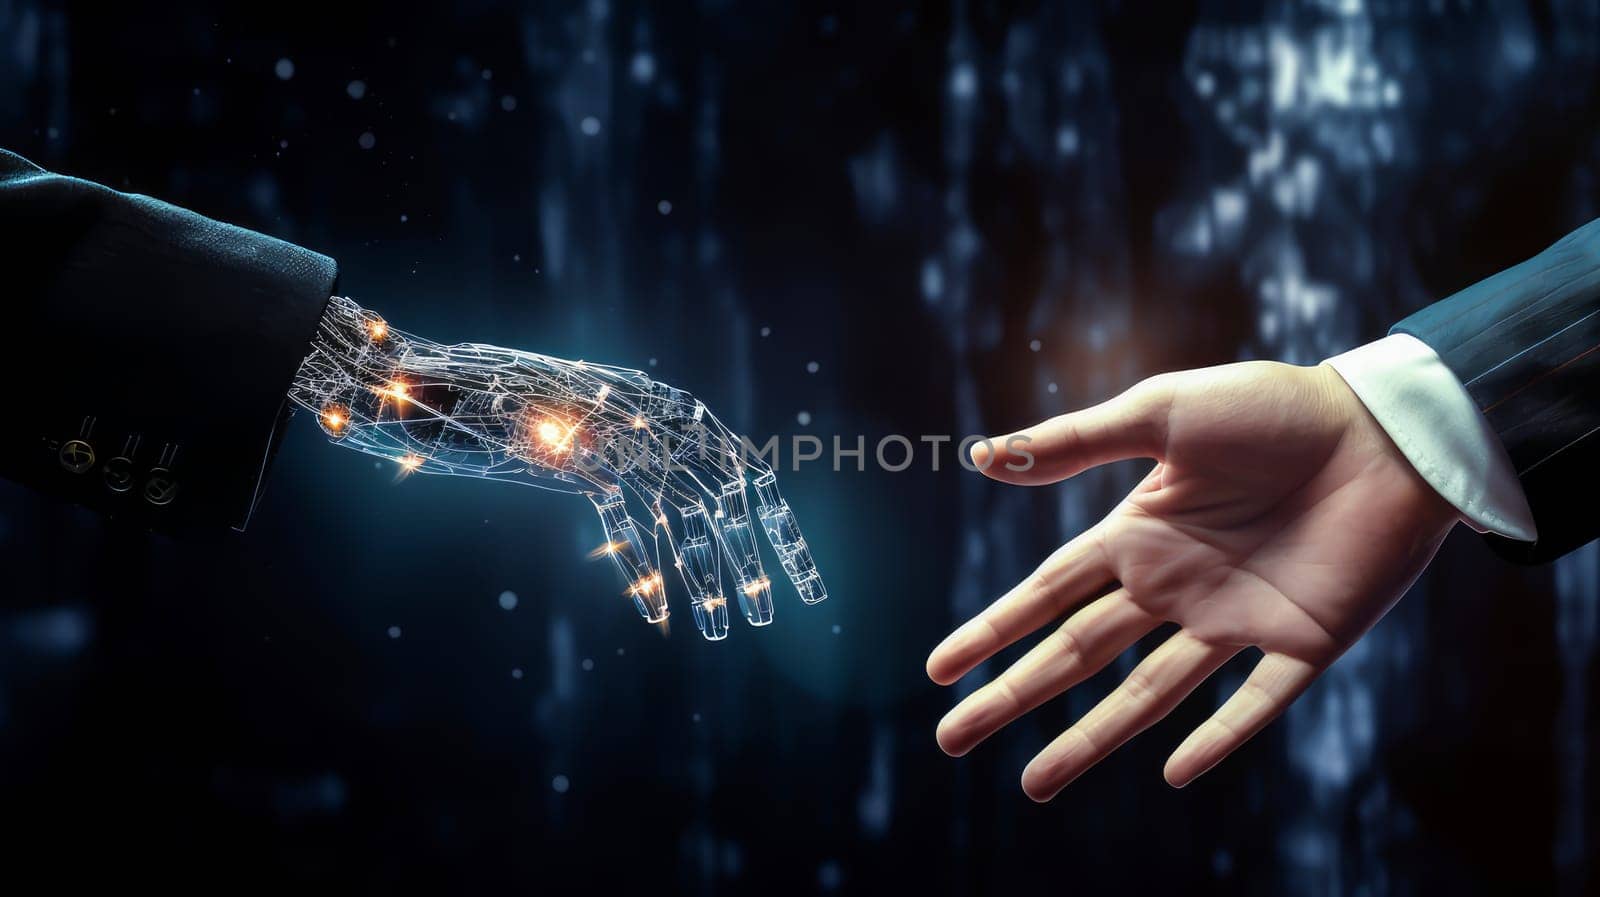 Artificial Intelligence Machine Learning Robot Hands and Human Touch. Big data and transmission protocol system. Robotics or artificial intelligence artificial intelligence connecting human interaction. Chatbot software